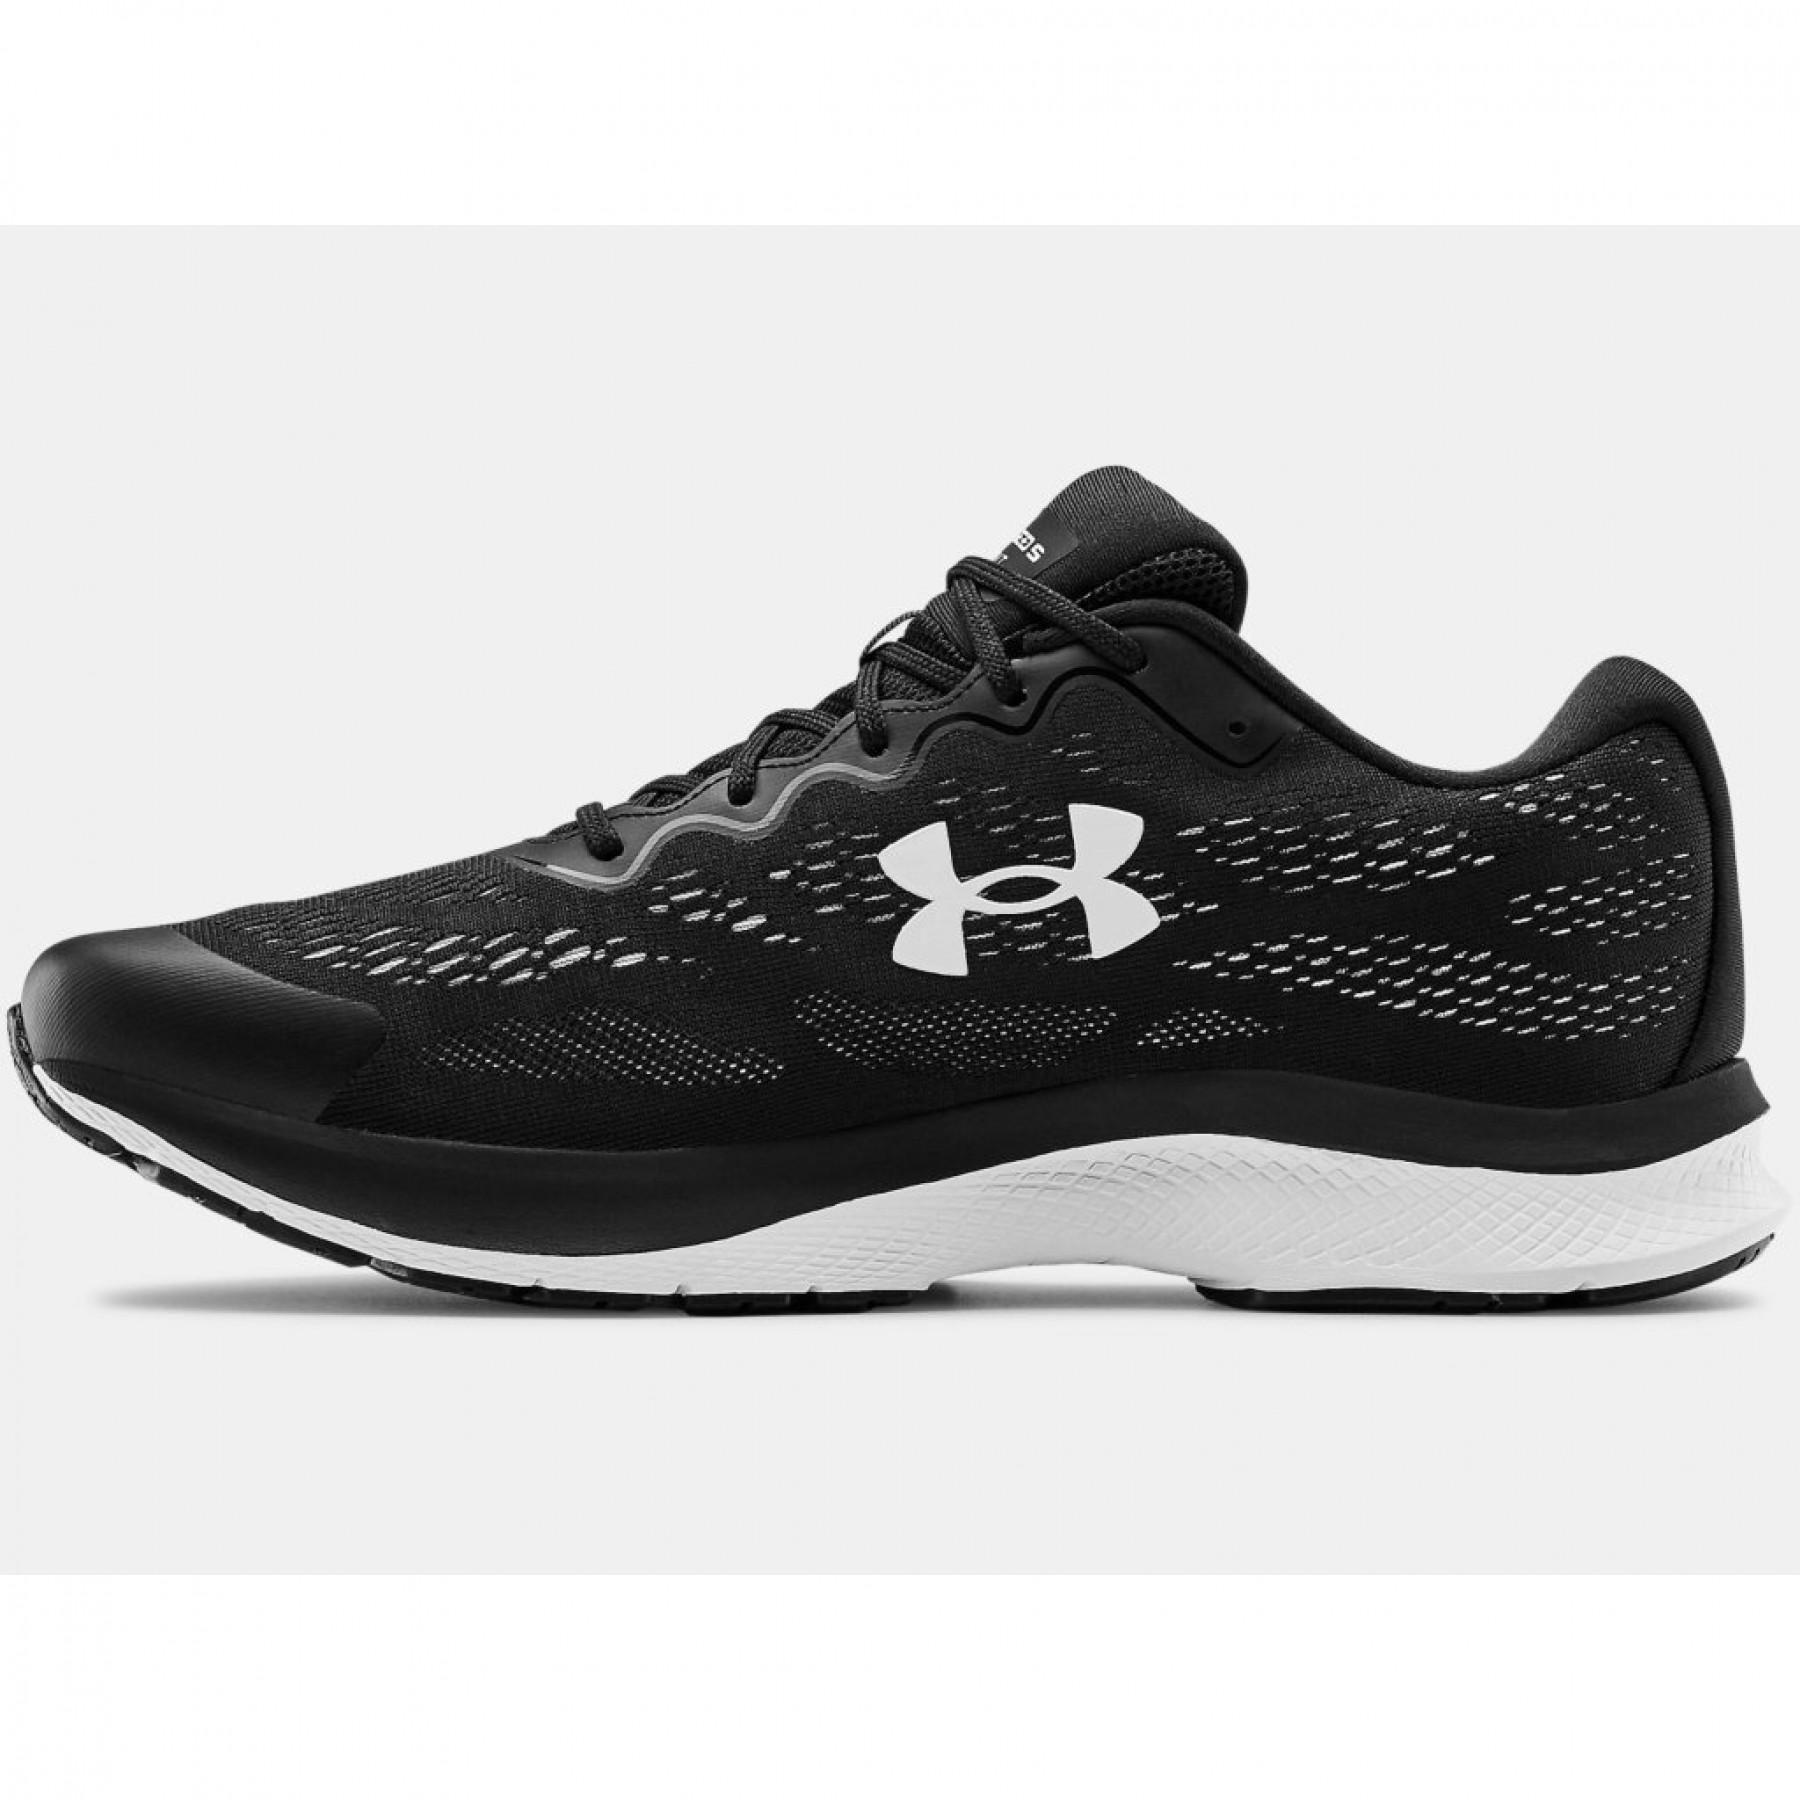 Zapatos Under Armour Charged Bandit 6